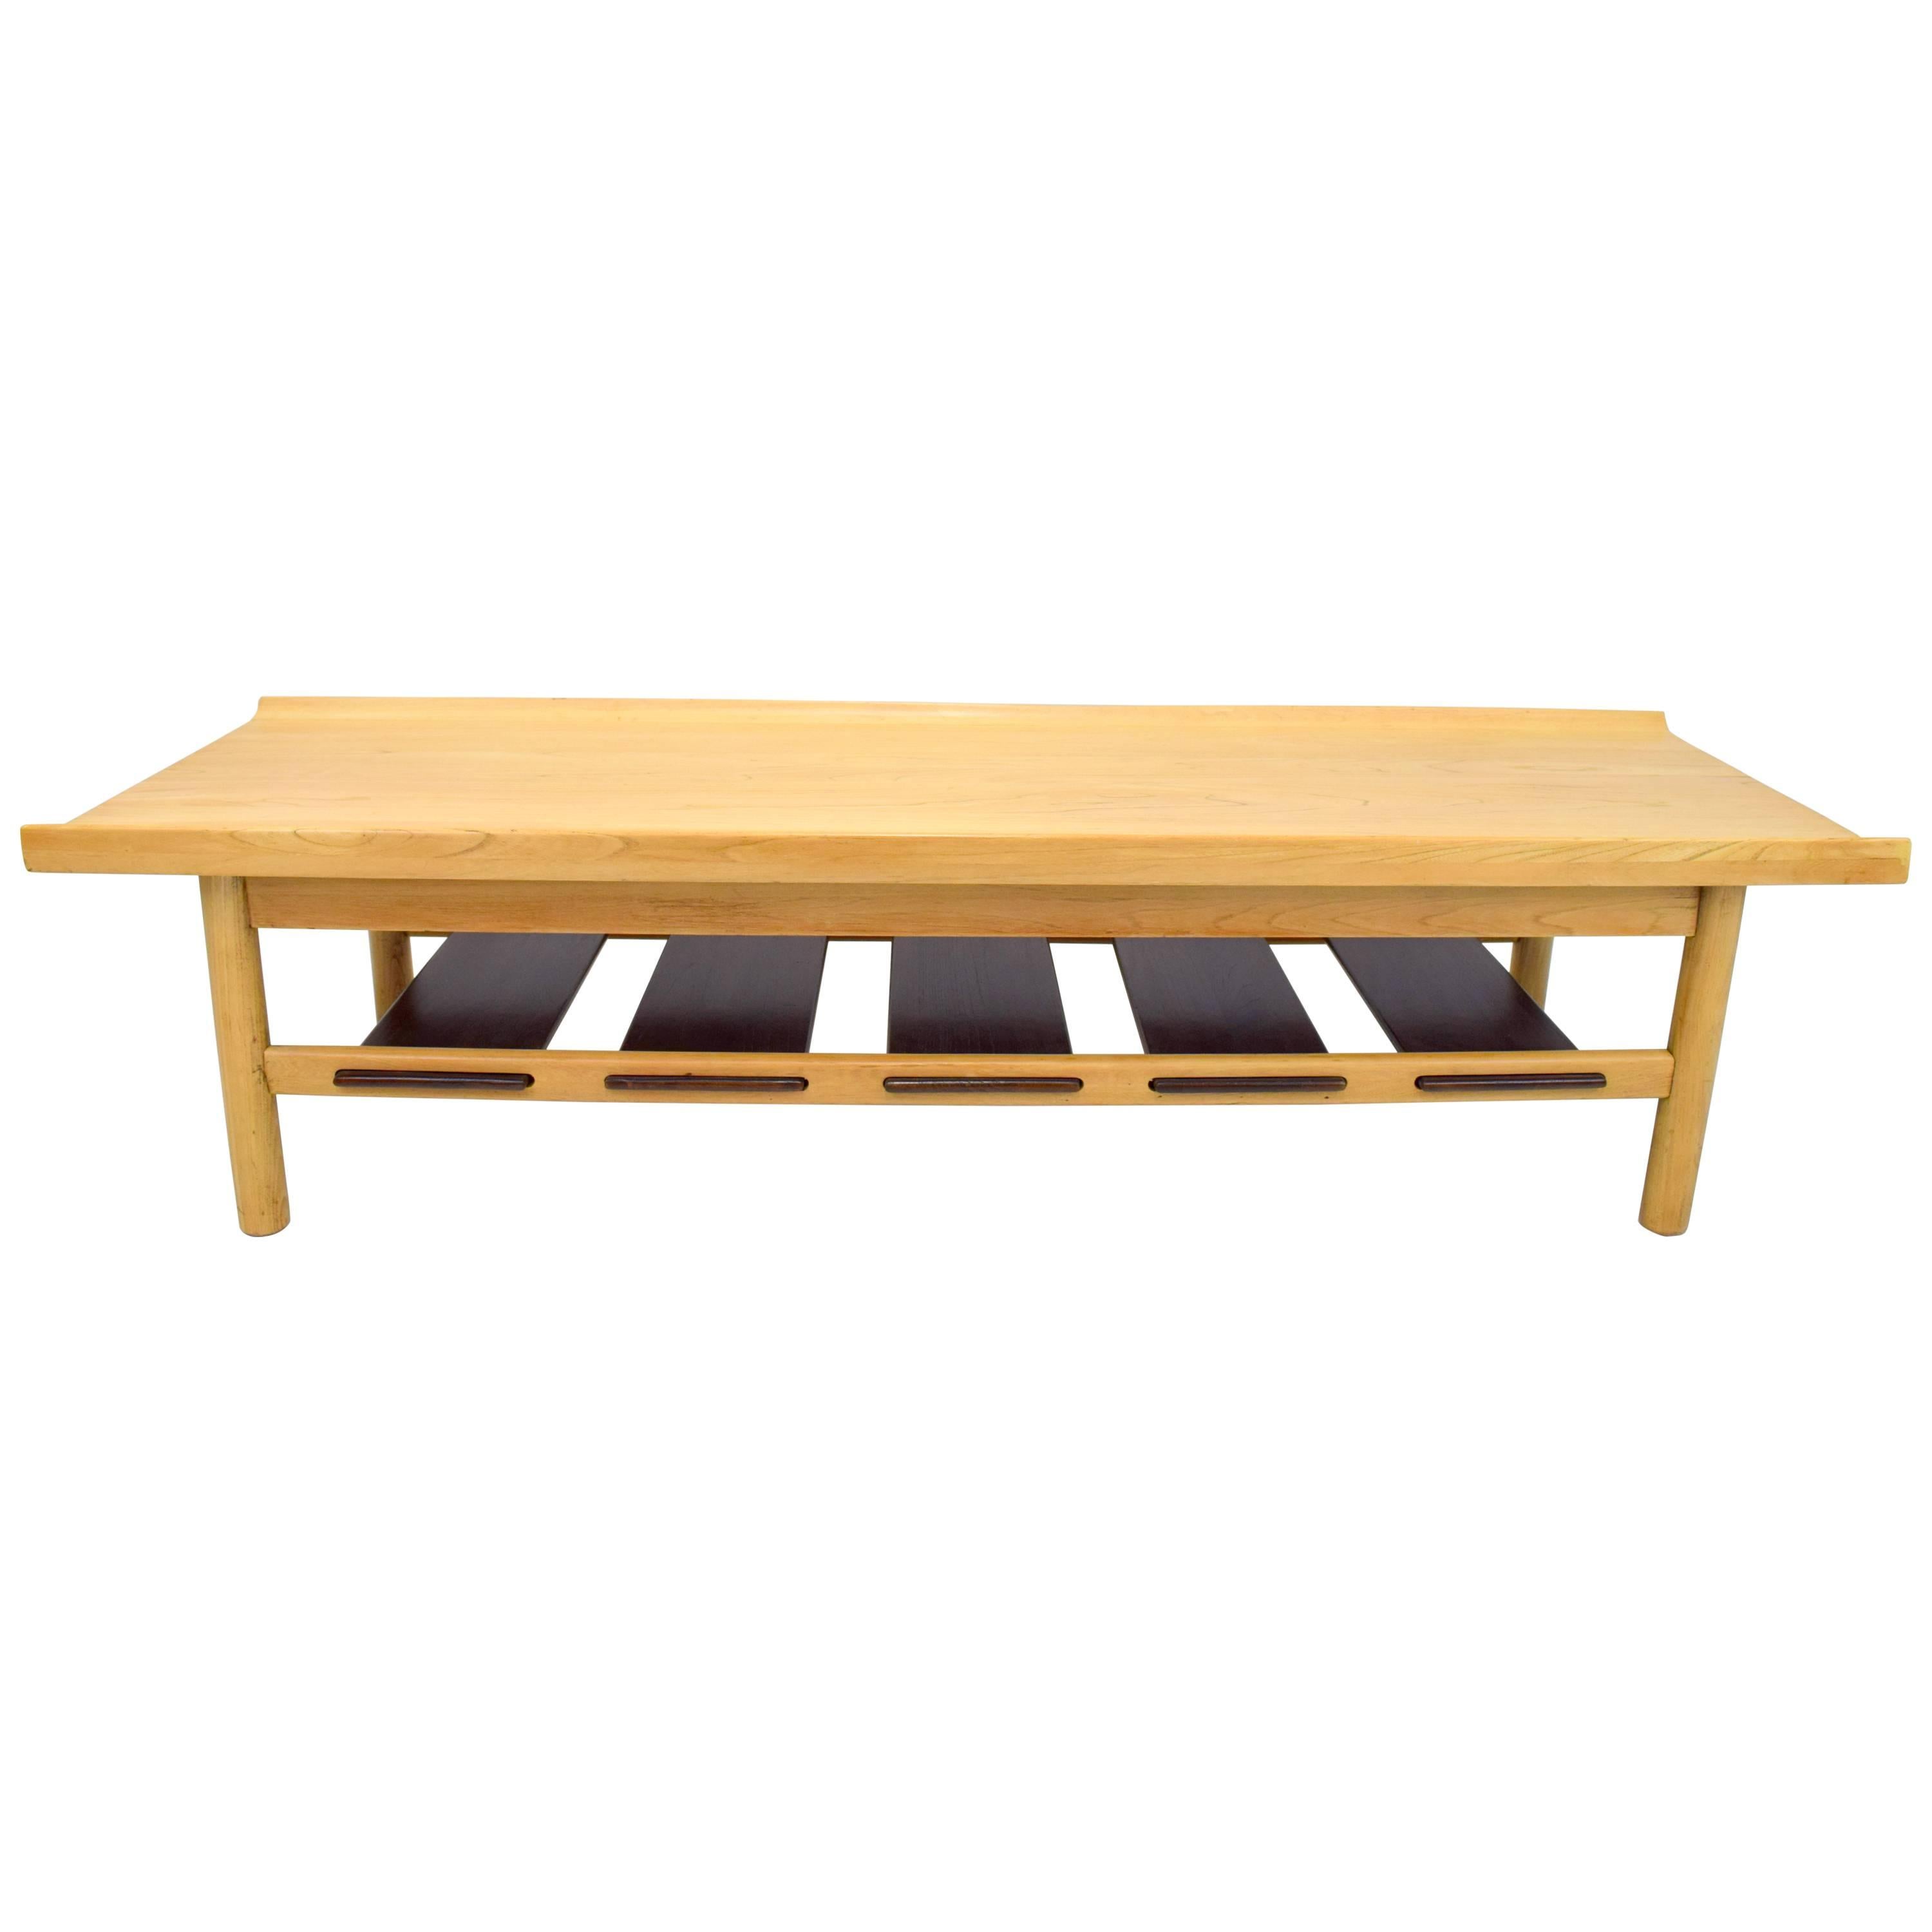 Lawrence Peabody Bleached Walnut Coffee Table Bench for Richardson Nemschoff